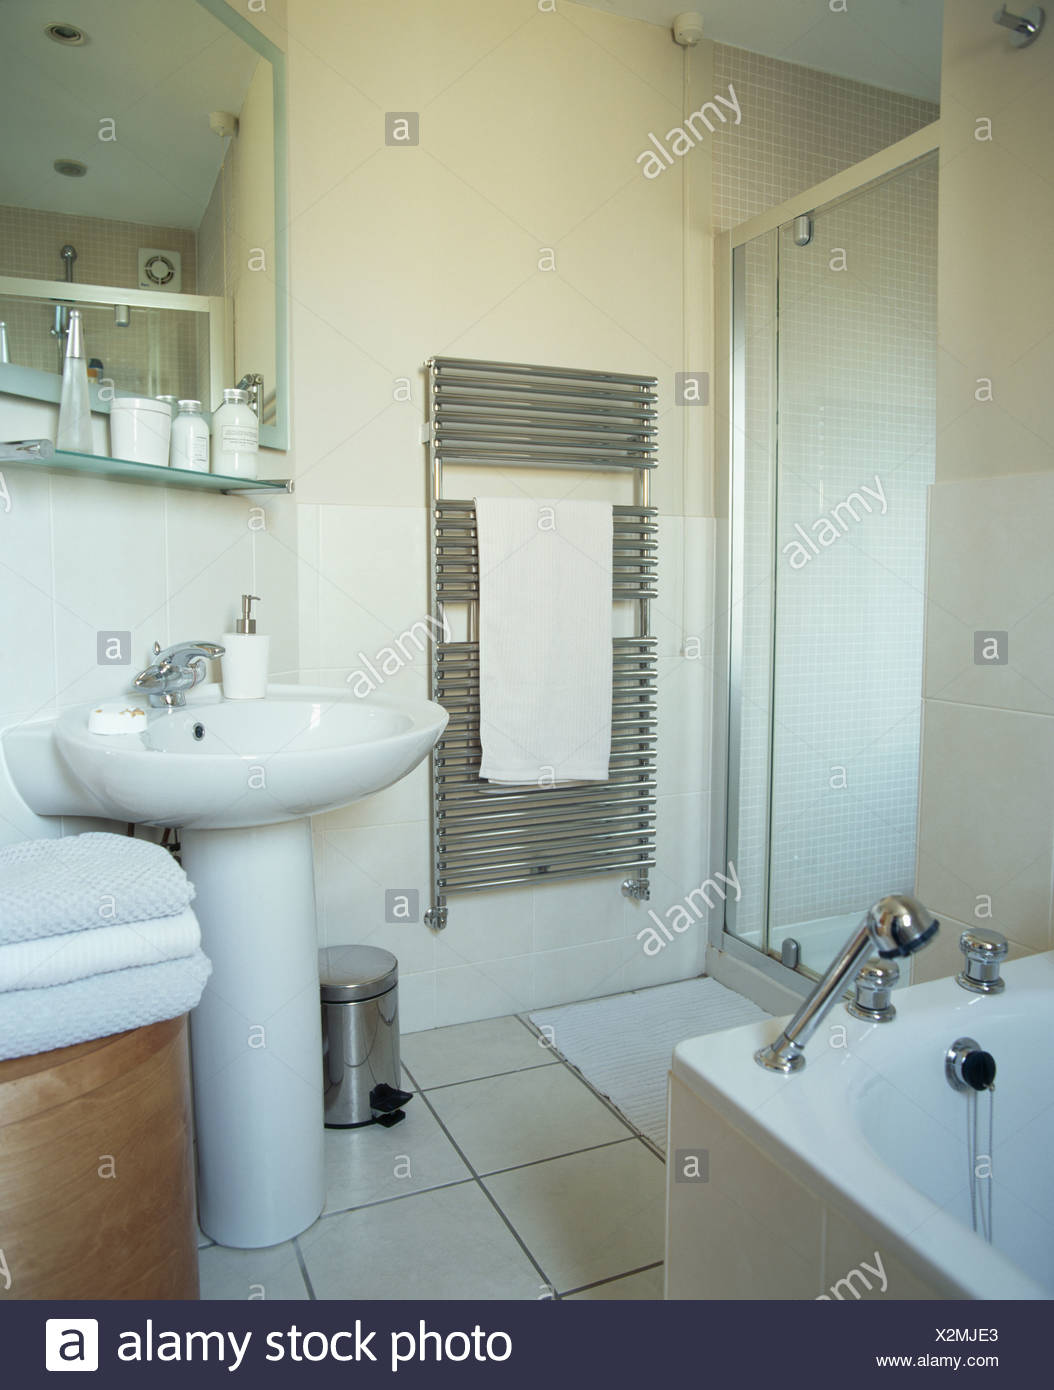 Wall Mounted Chrome Radiator Beside Glass Shower Cabinet And White